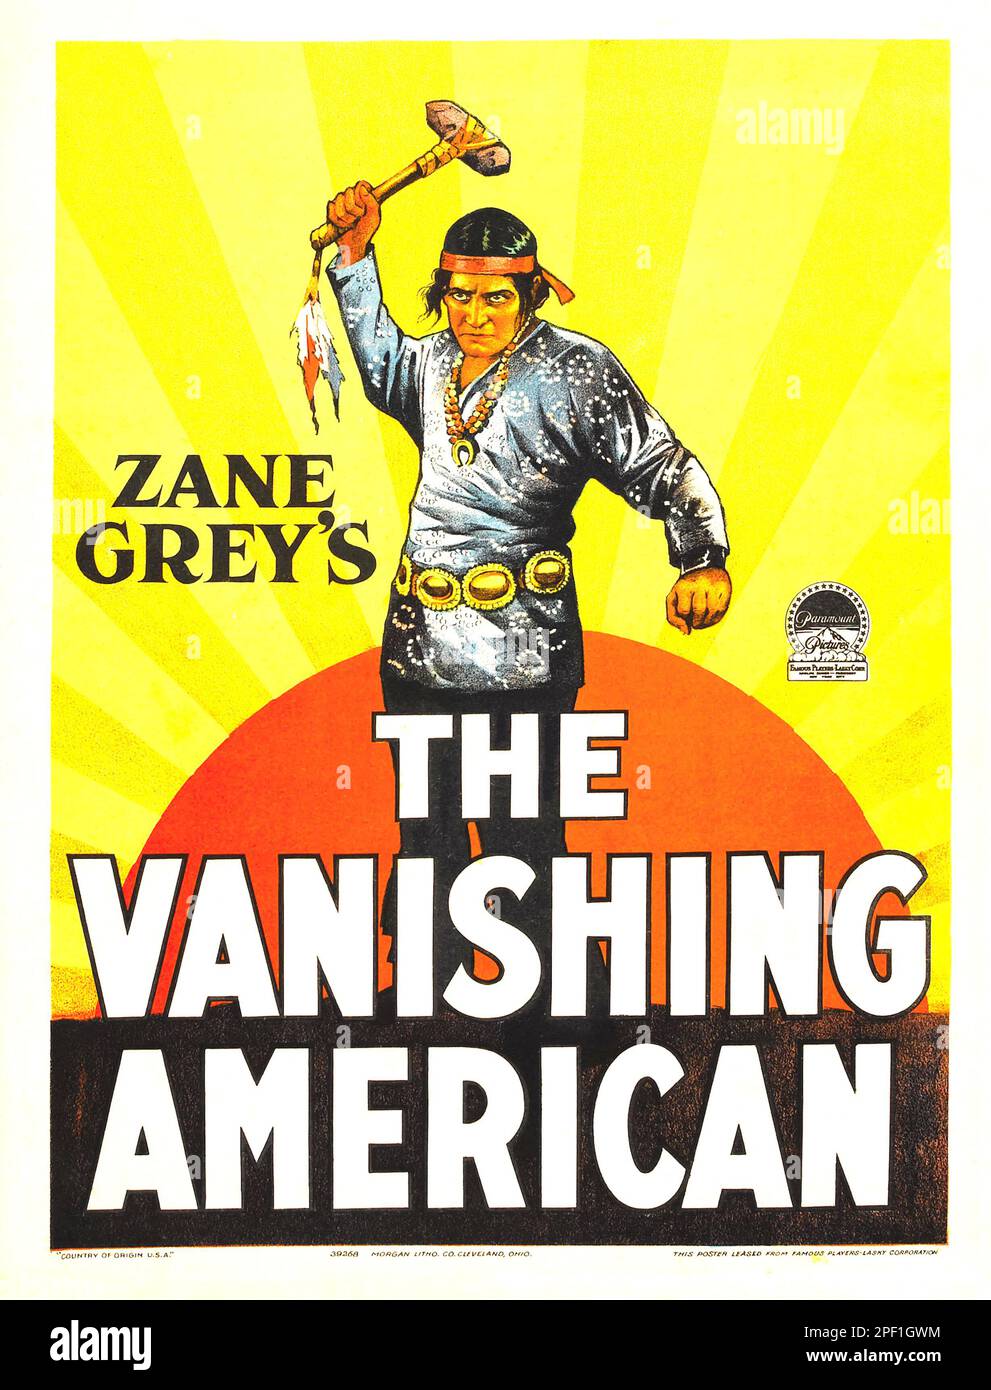 Zane Grey's The Vanishing American - 1925 - A native American approaches tomahawk in hand. Stock Photo